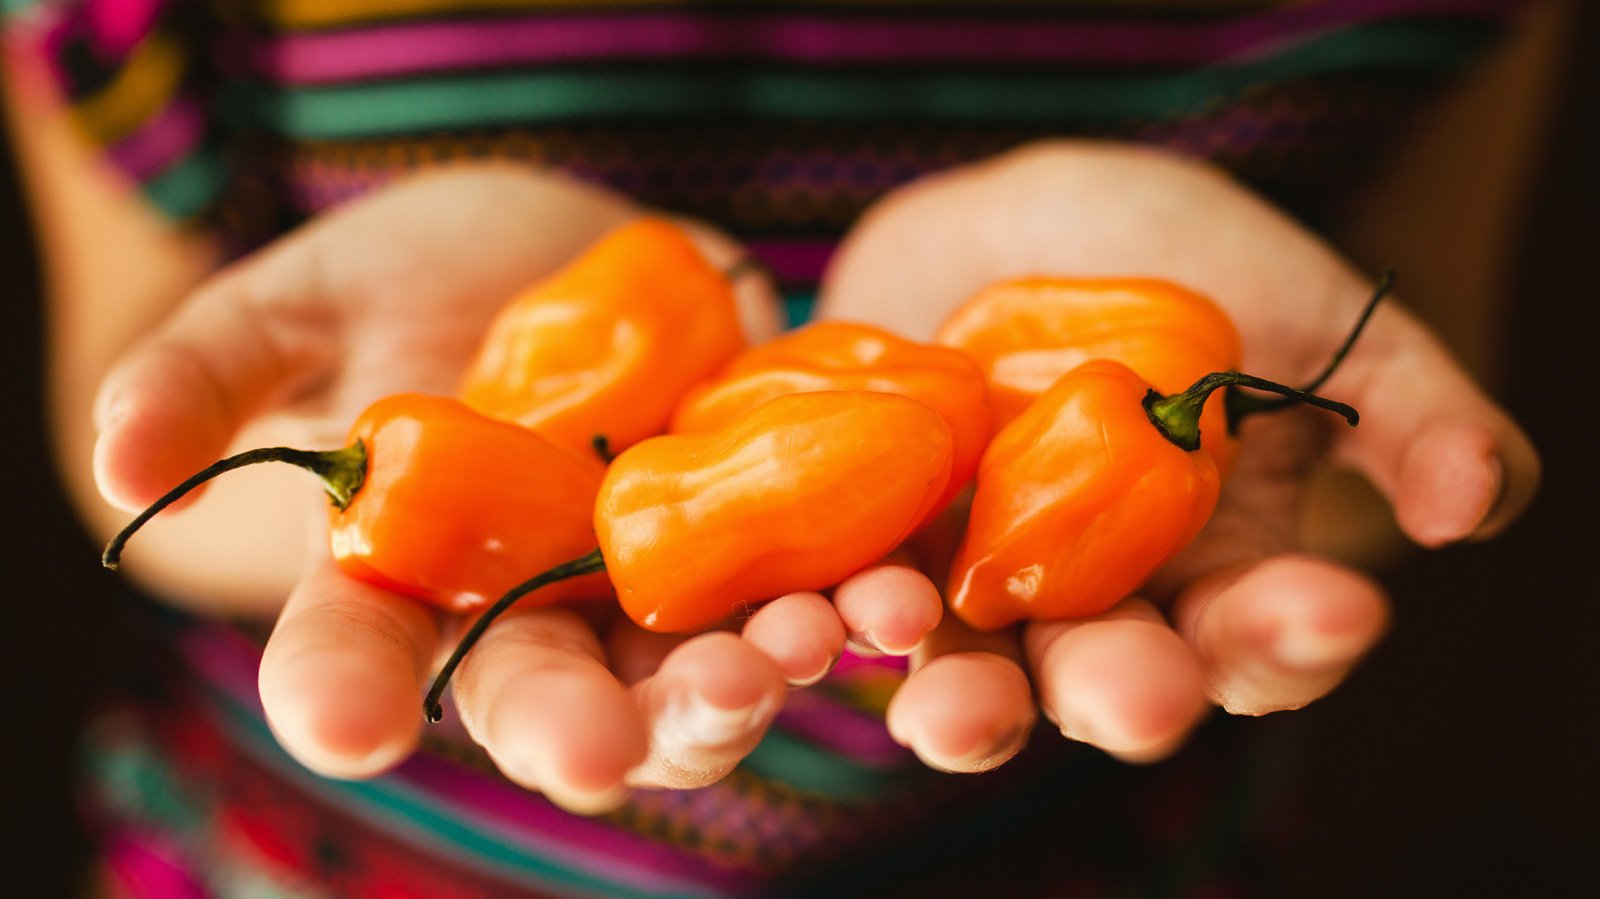 Read This Before Buying Any More Peppers